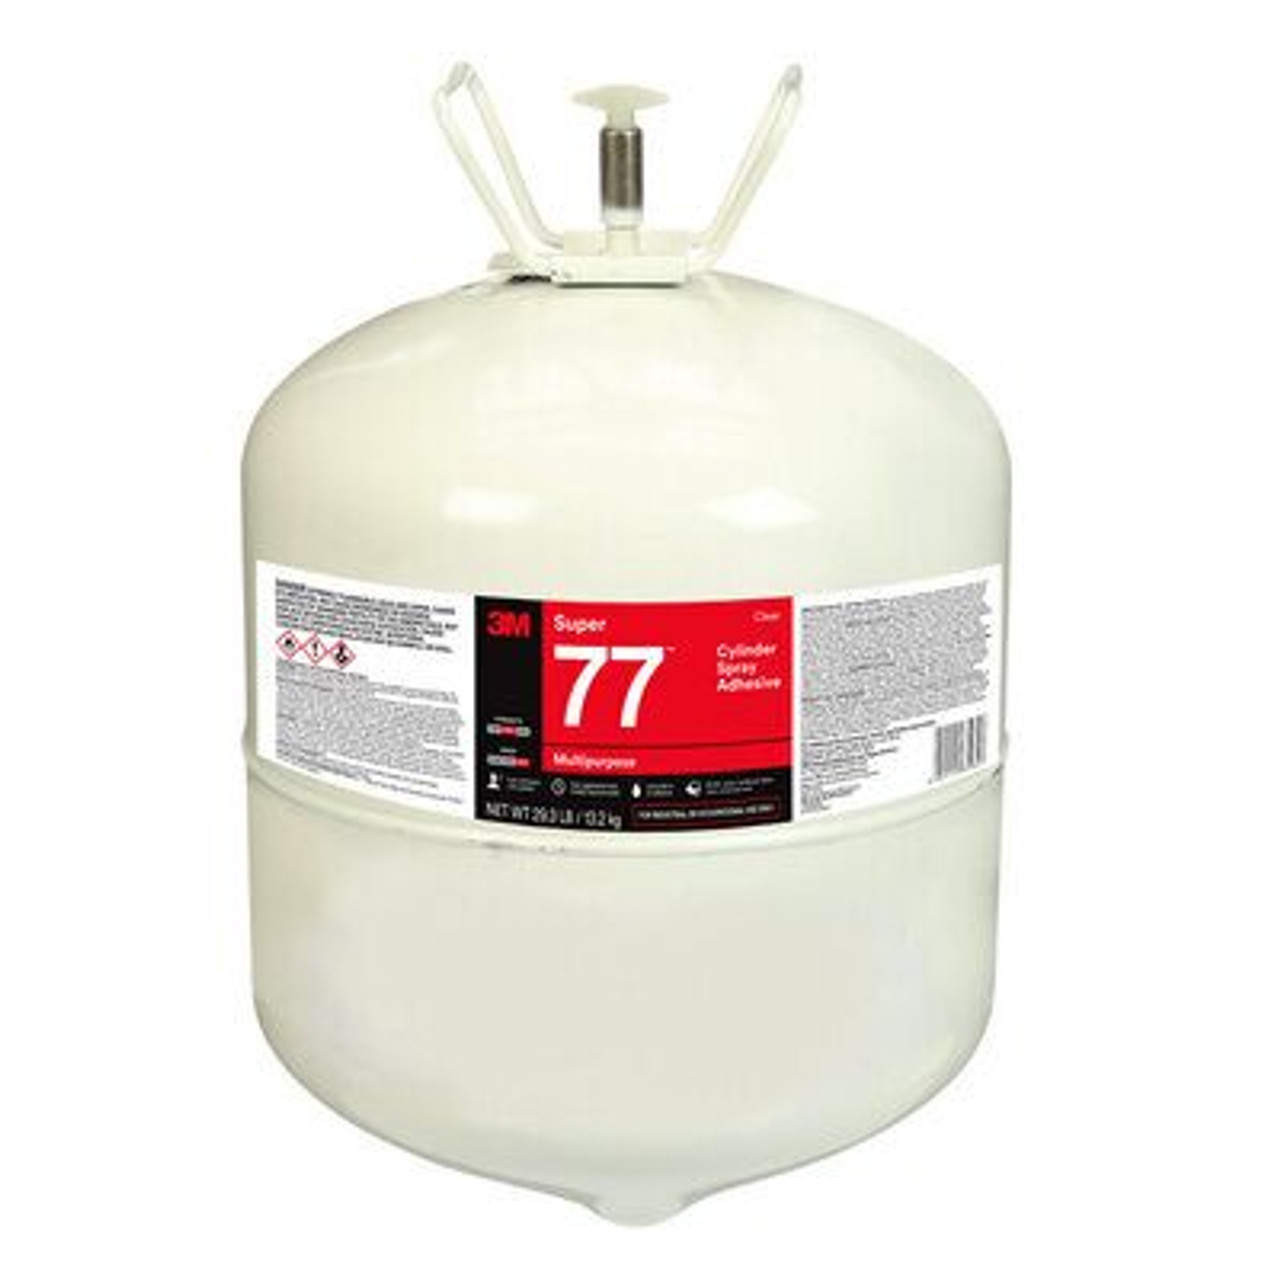 3M™ Super 77™ Multipurpose Cylinder Spray Adhesive, Clear, Large Cylinder  (Net Wt 29.3 lb) - NOT FOR CONSUMER/RETAIL SALE OR USE - The Binding Source